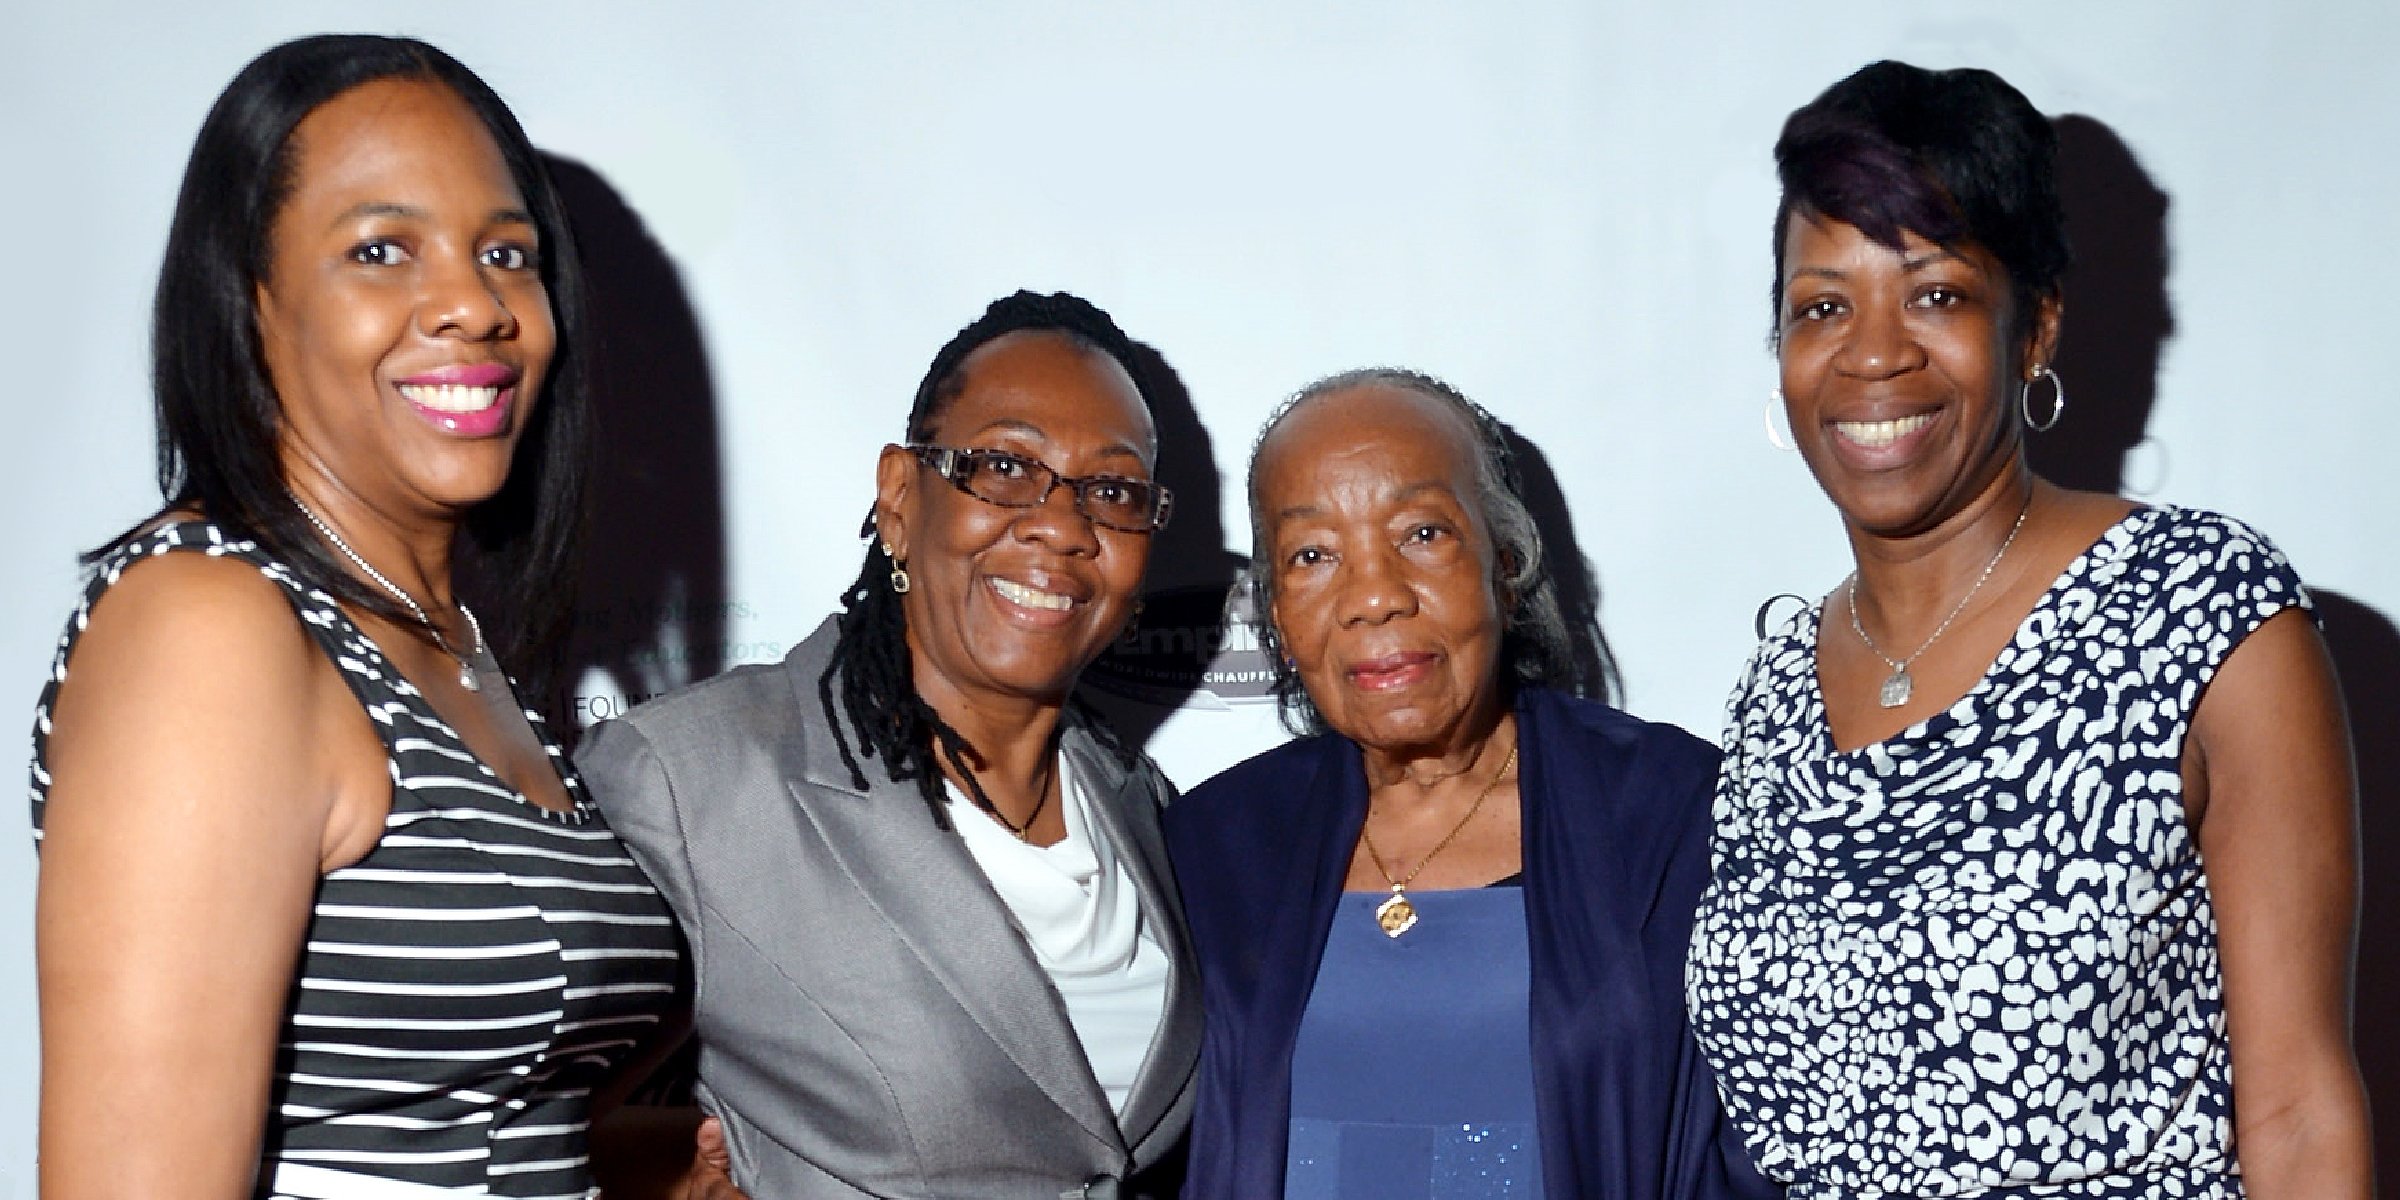 Annie Carter, Gloria Carter, Hattie Carter, and Michelle Carter | Source: Getty Images